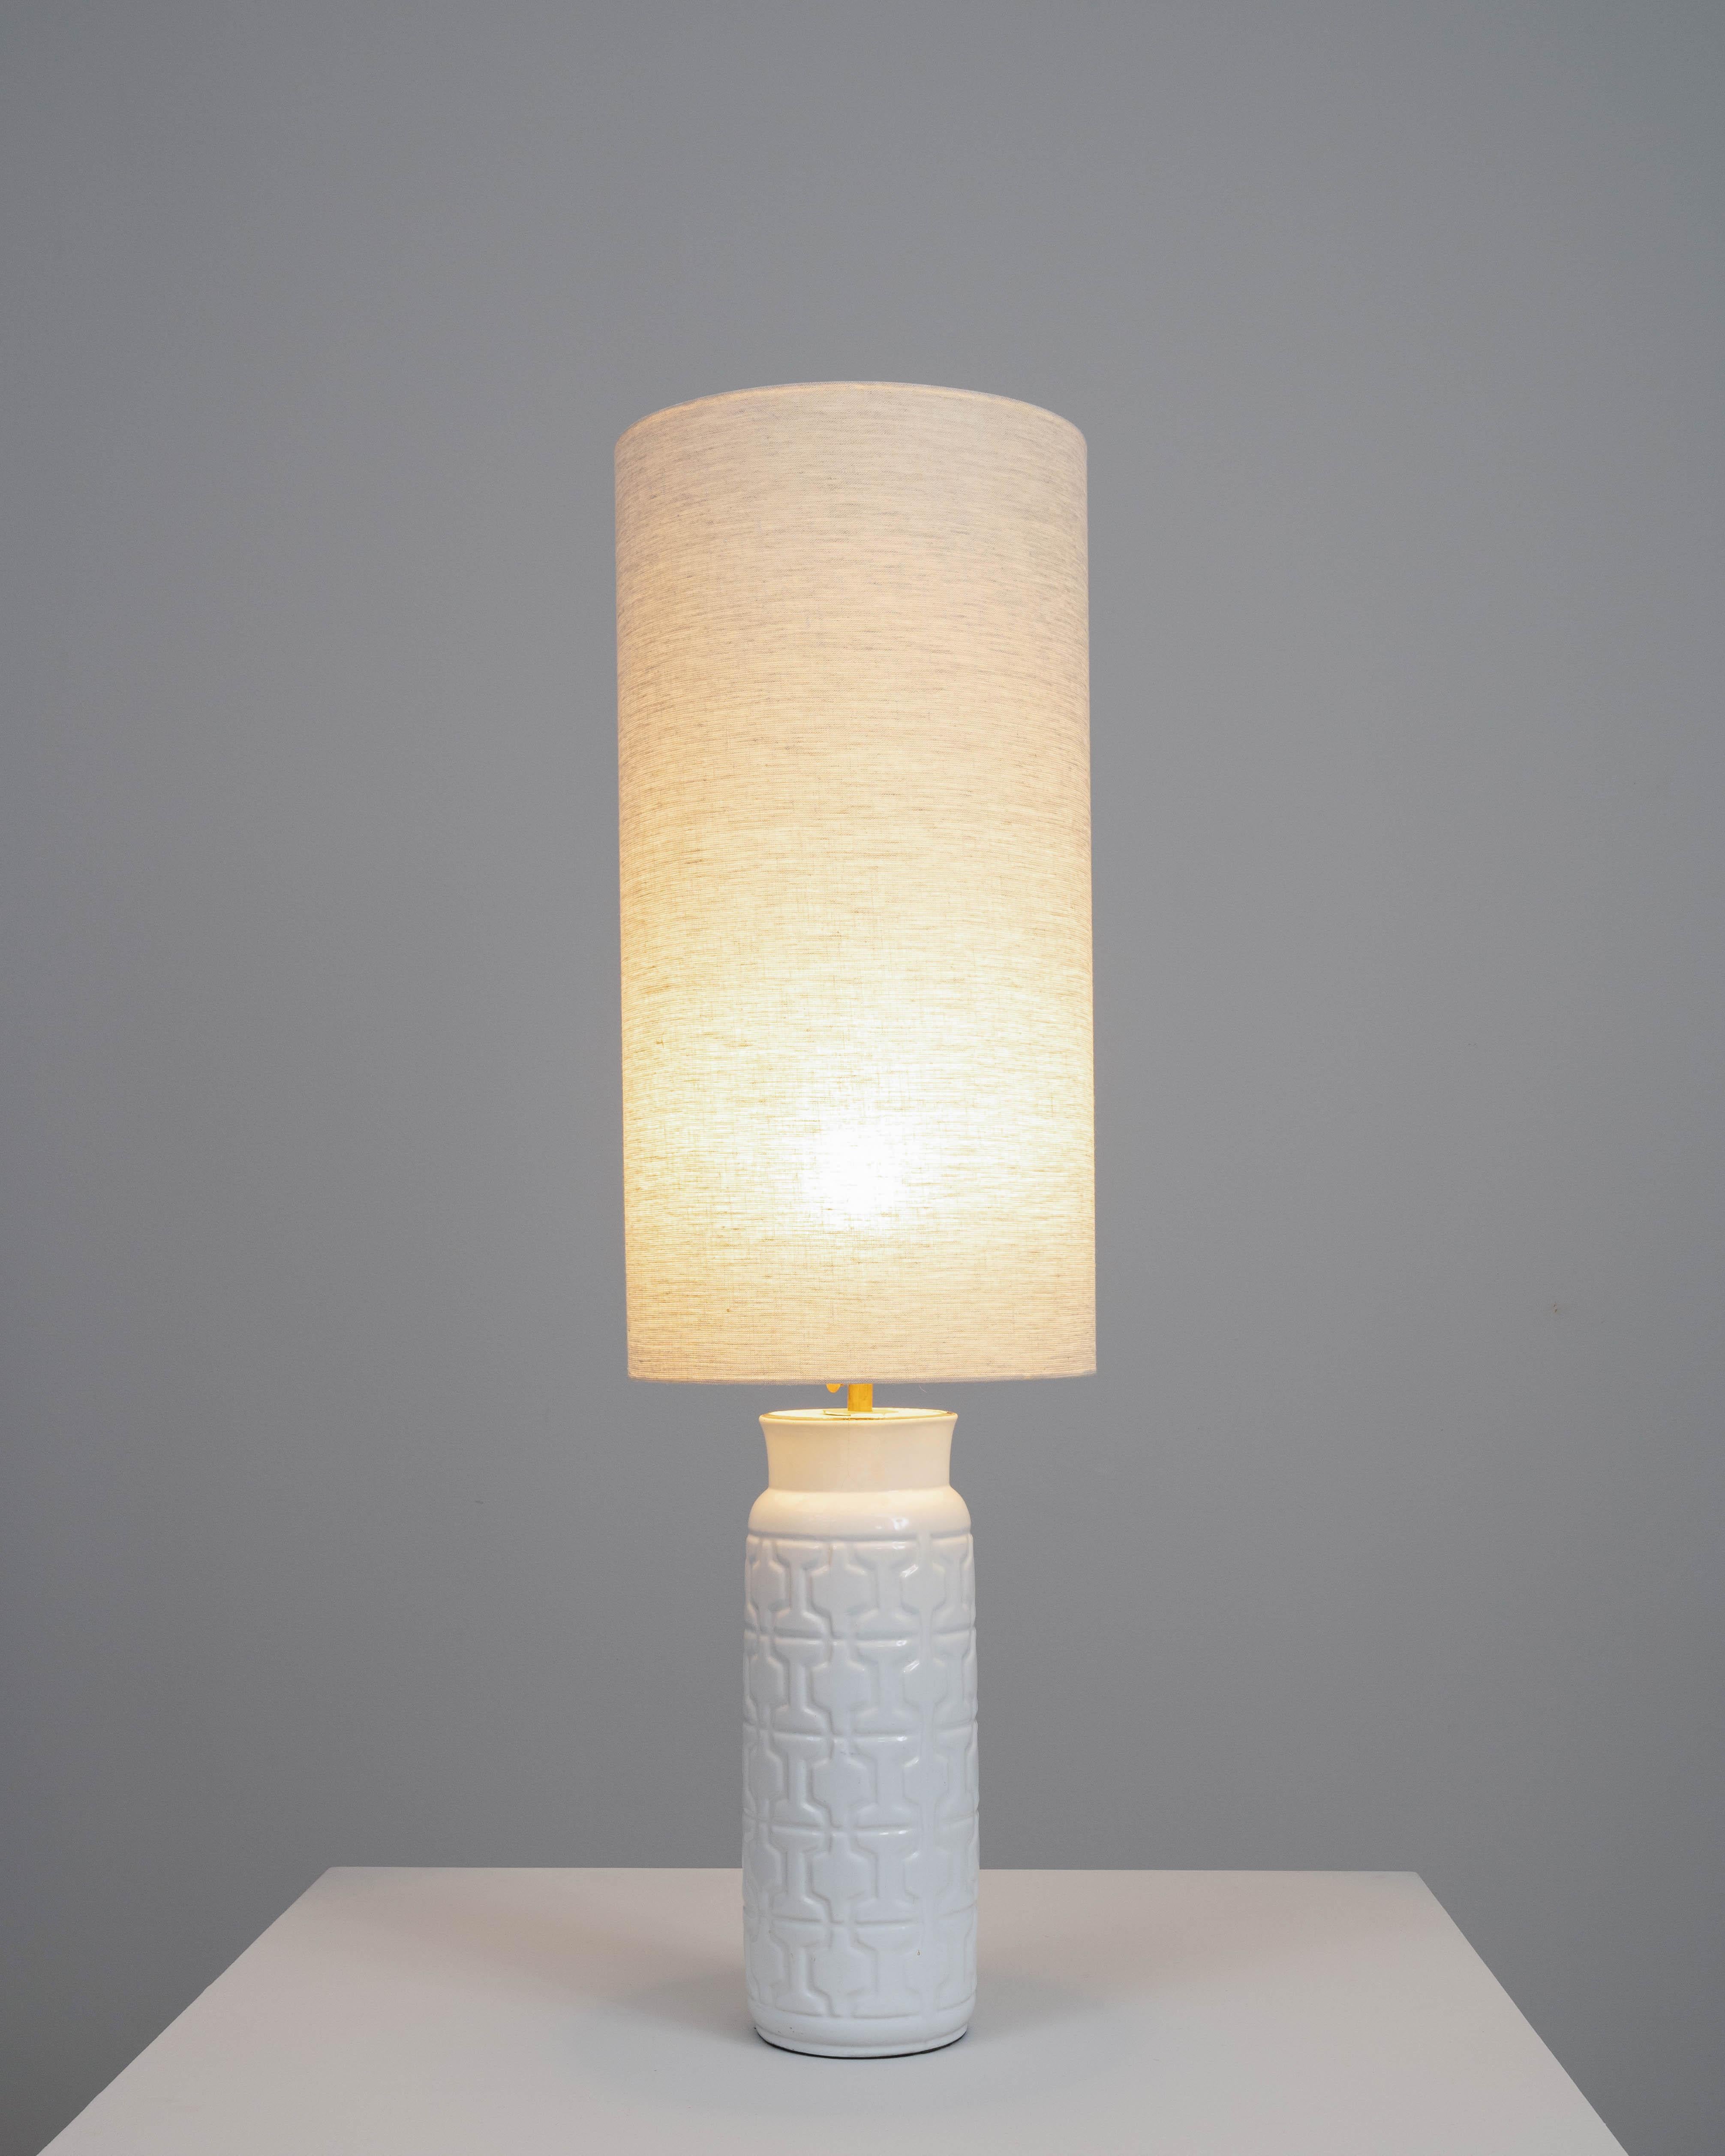 Add a touch of understated elegance to your home with this early 20th-century British ceramic table lamp. The lamp features a sleek, cylindrical base with a subtle geometric pattern, beautifully glazed in a pristine white finish. Topped with a tall,